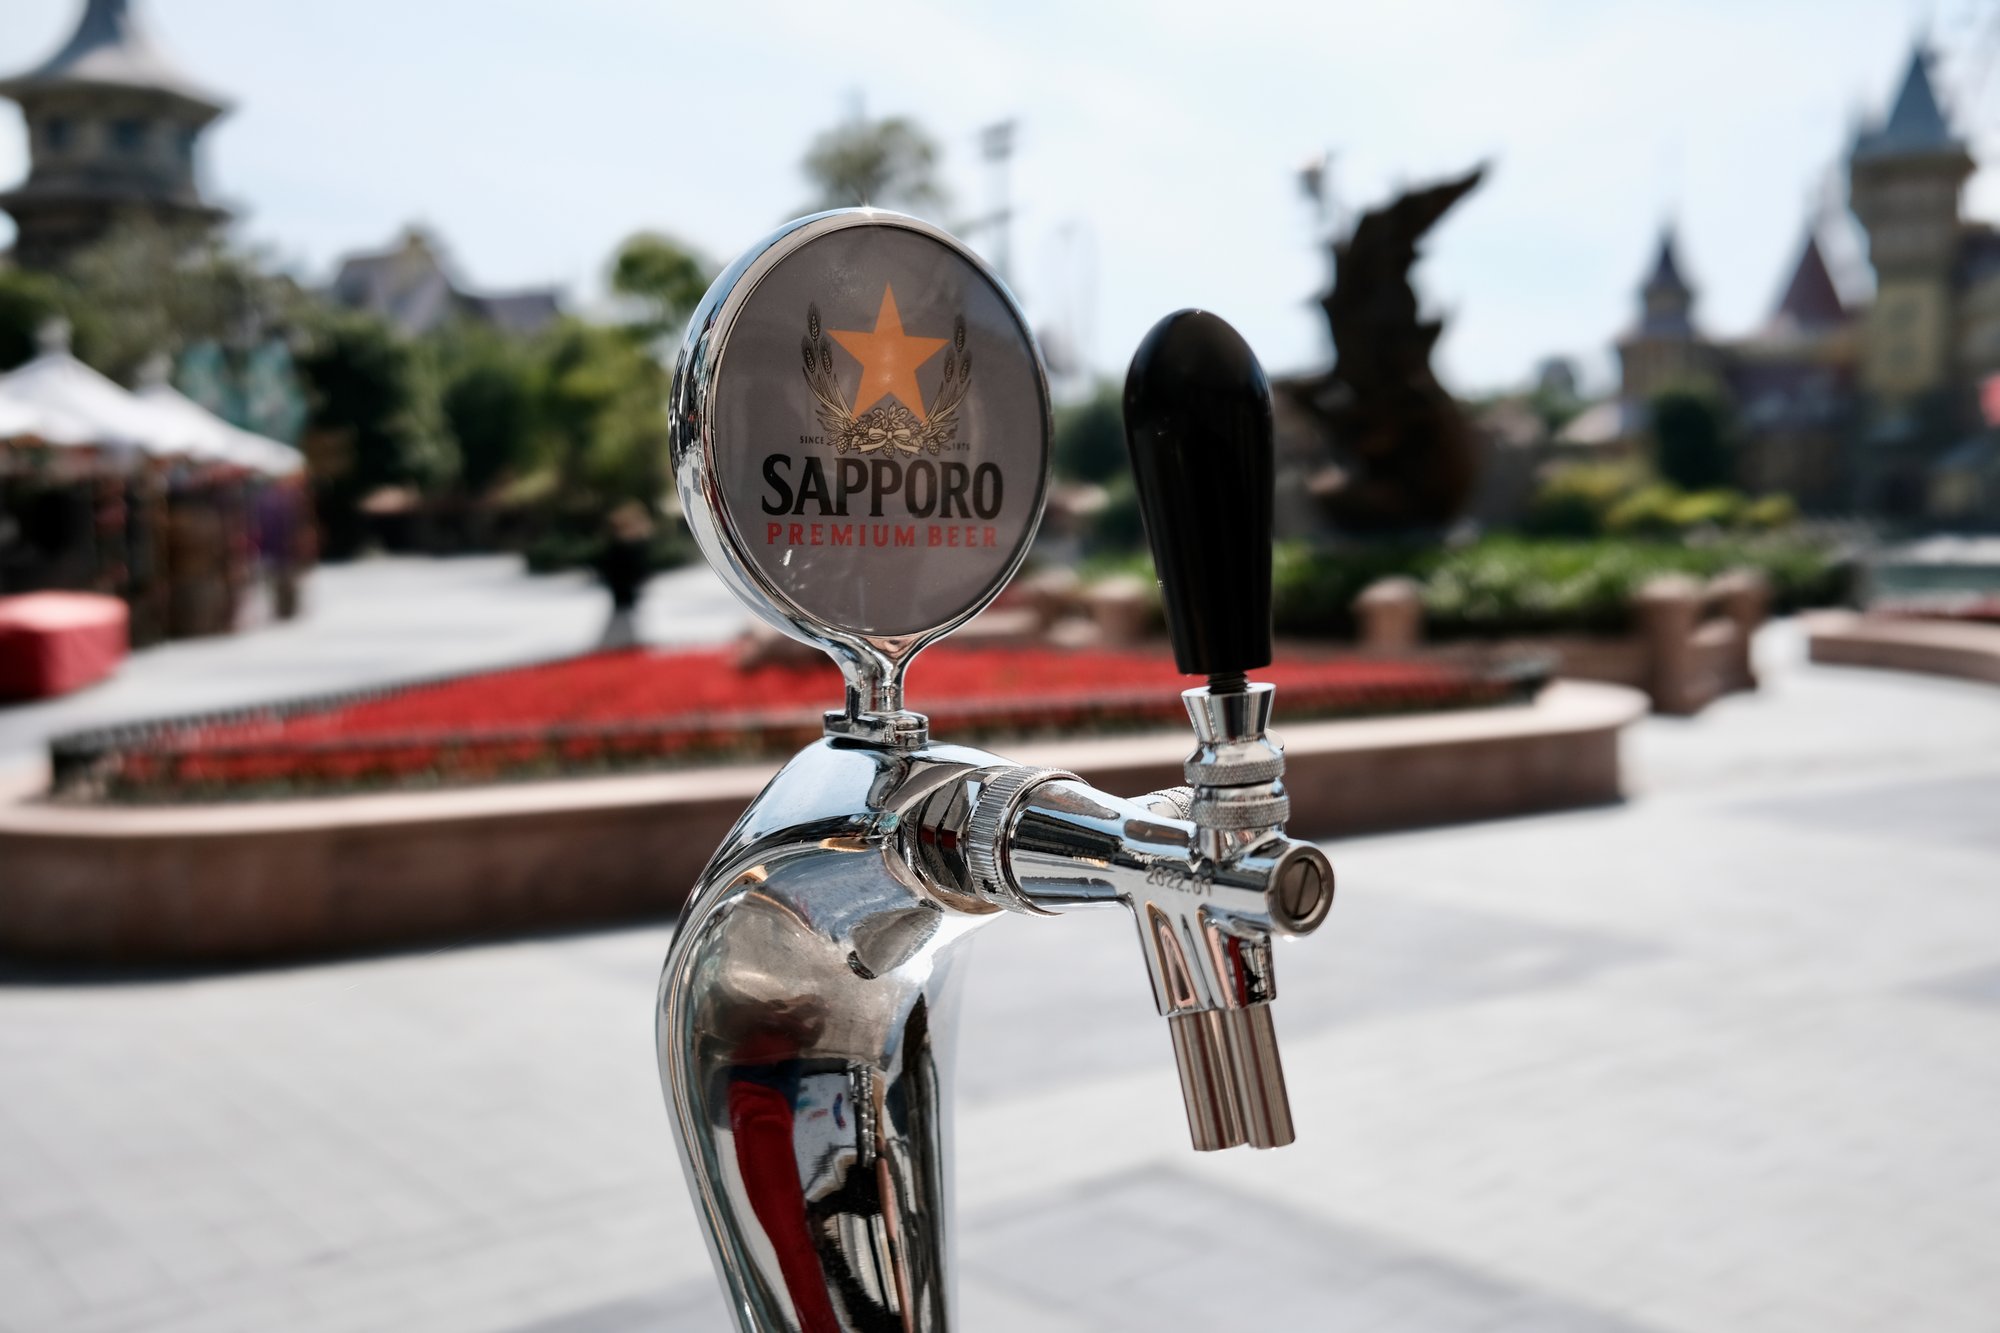 Sapporo Beer is ready